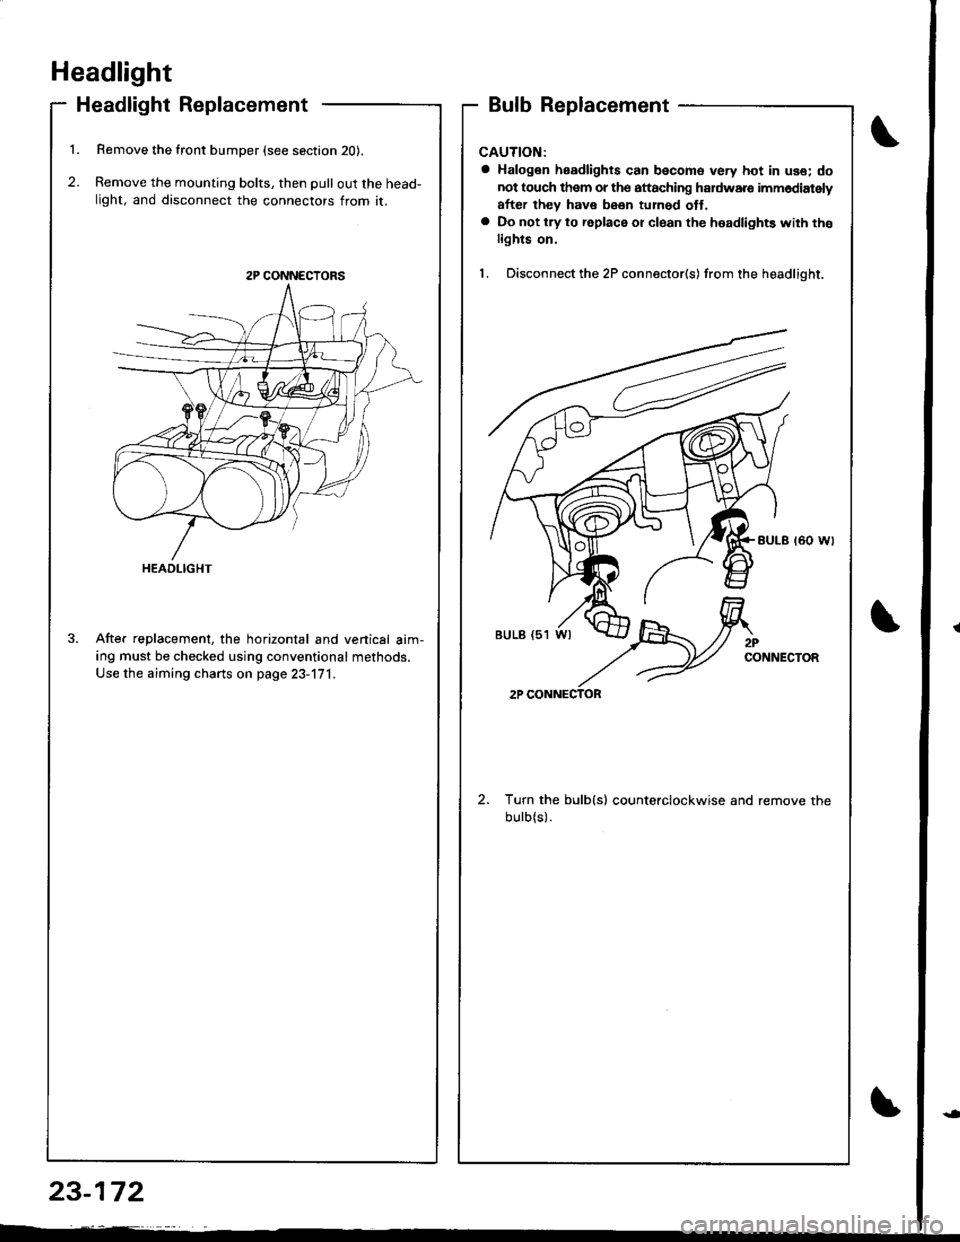 HONDA INTEGRA 1998 4.G Workshop Manual Headlight
Headlight Replacement
1. Remove the front bumper (see section 20).
2. Remove the mounting bolts, then pull out the head-
light, and disconnect the connectors from it.
After replacement, the 